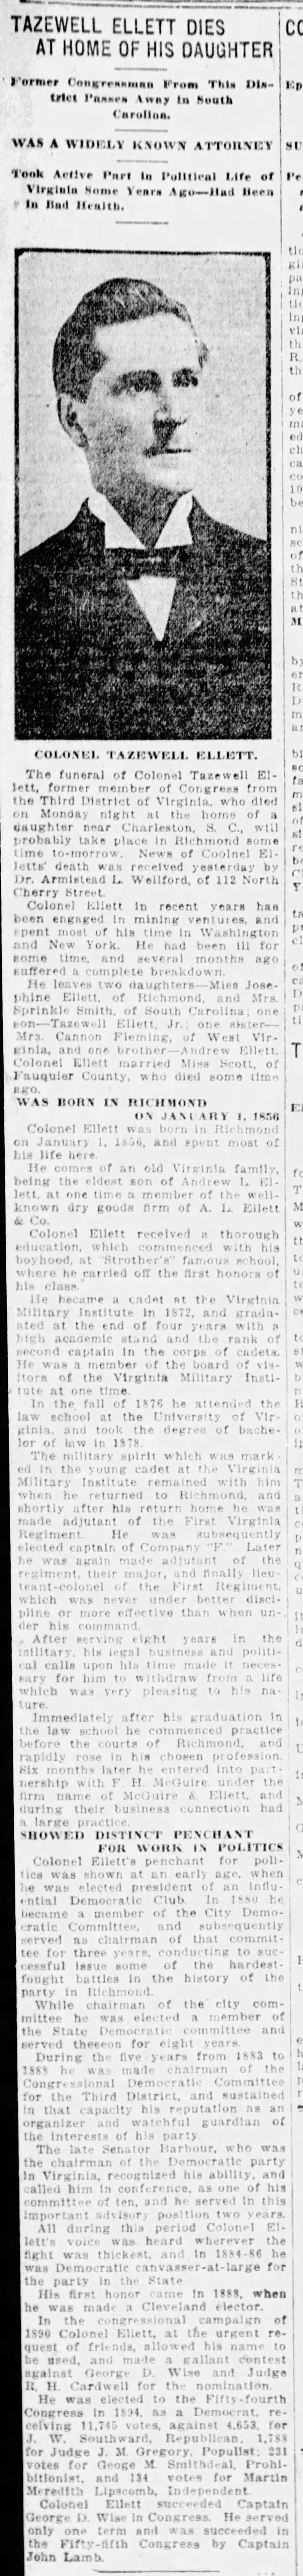 Tazewell Ellett Dies at Home of His Daughter; 20 May 1914; The Times-Dispatch; 11